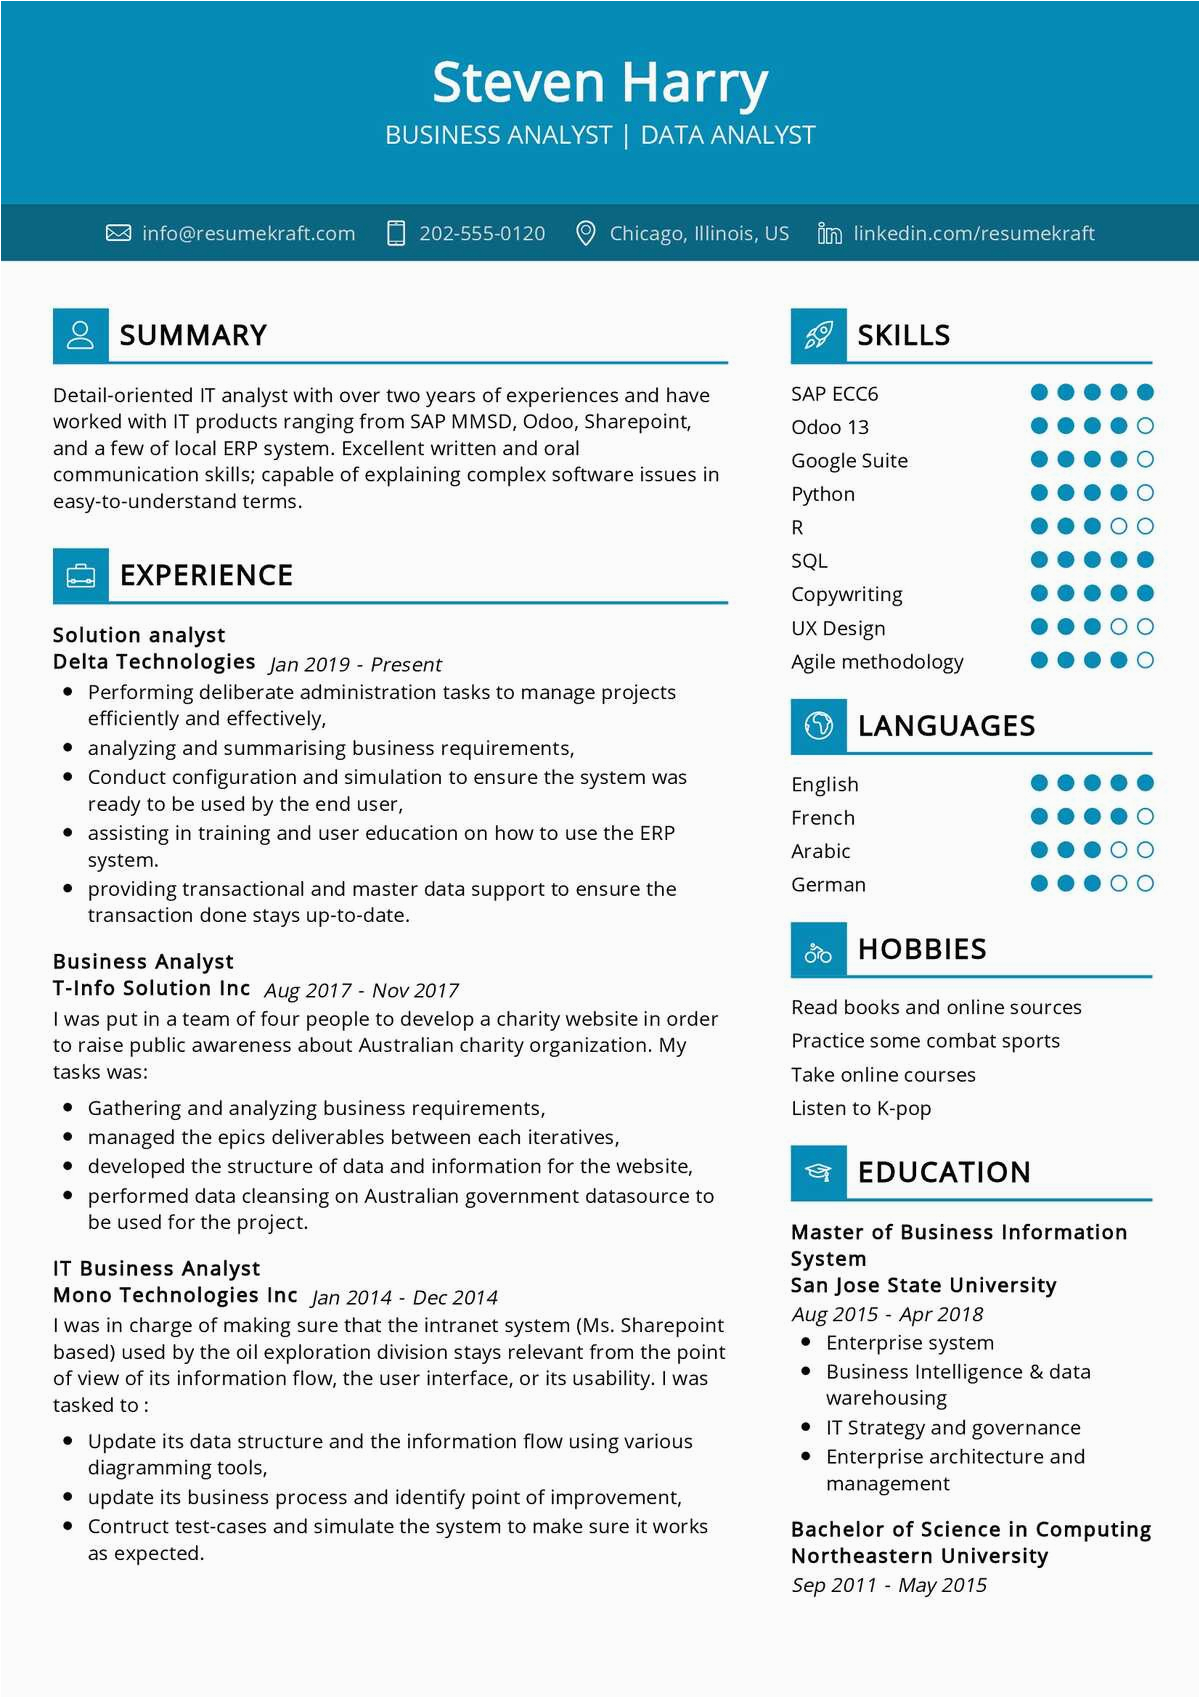 Resume Sample with A Few Years Of Experience Data Analyst Resume Sample 2021 Resumekraft